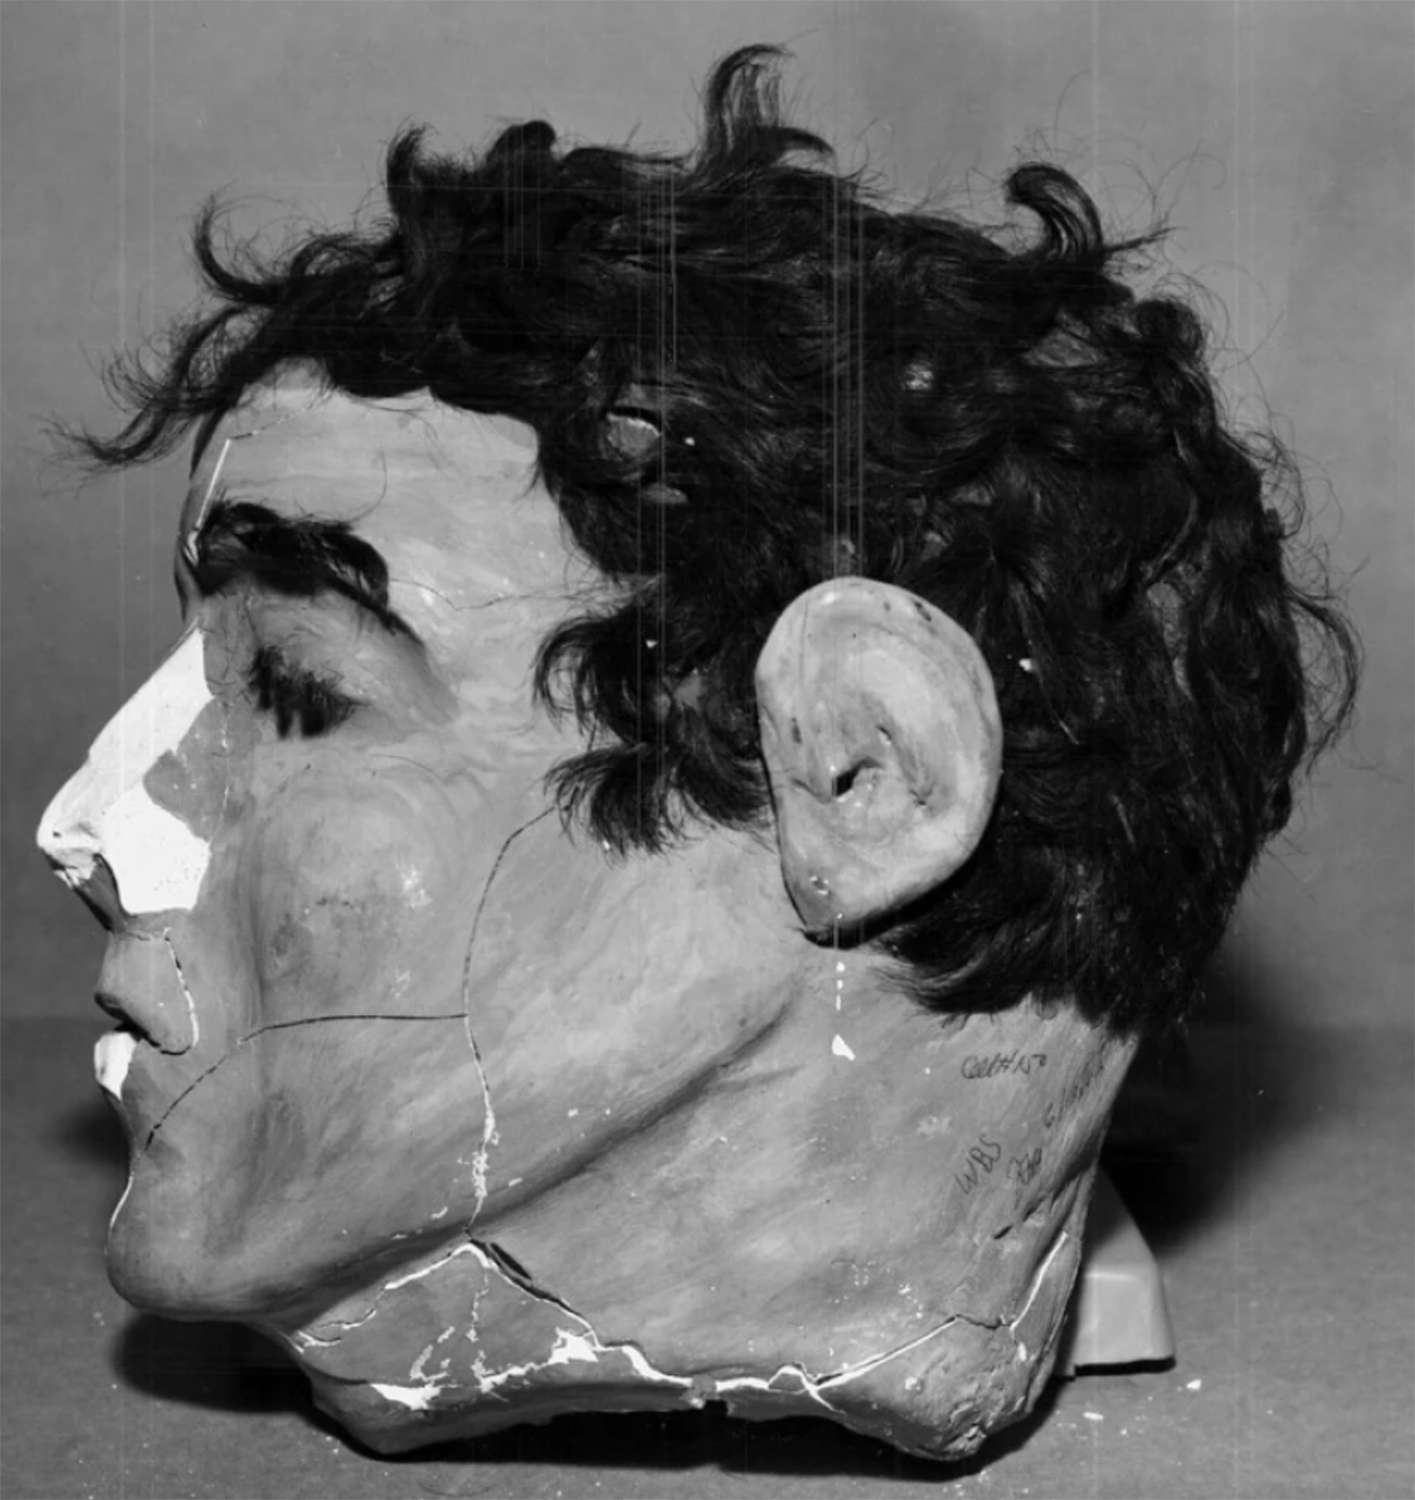 Profile of the dummy head found in Morris’ cell. The broken nose happened when the head rolled off the bed and hit the floor after a guard reached through the bars and pushed it, 米国によると. Marshal’s website.